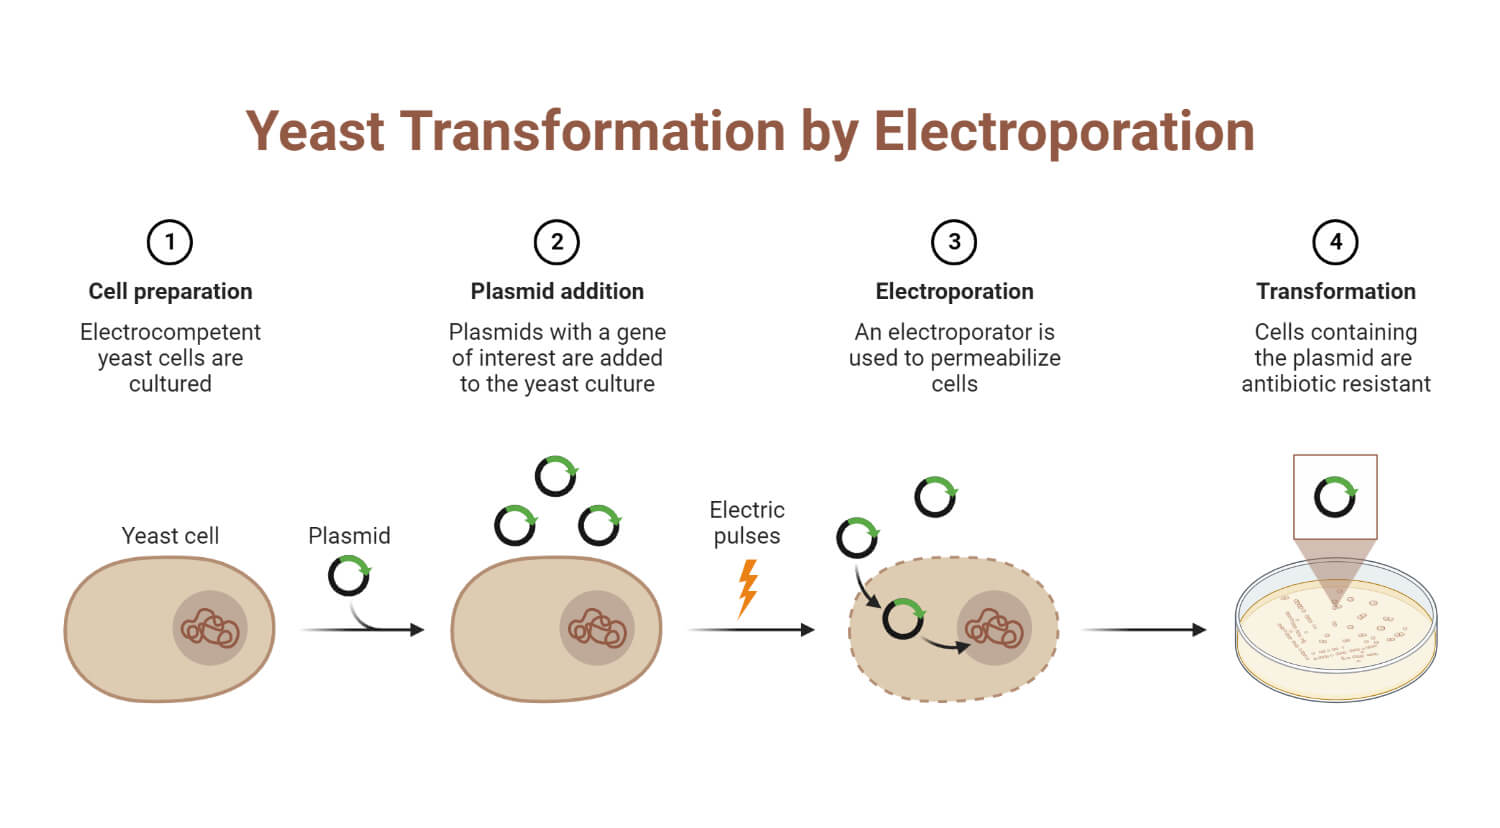 Yeast Transformation by Electroporation